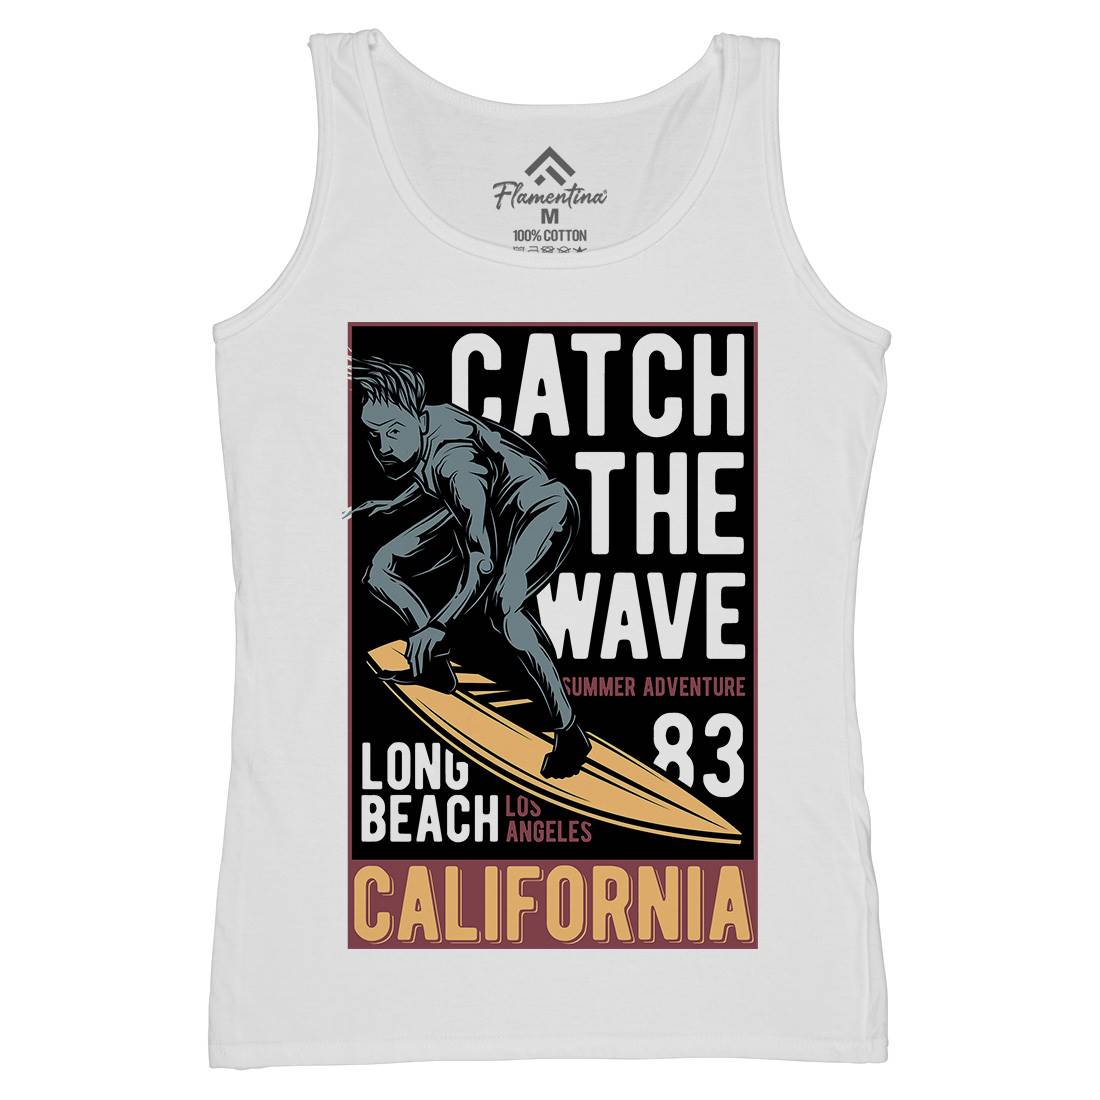 Catch The Wave Surfing Womens Organic Tank Top Vest Surf B880